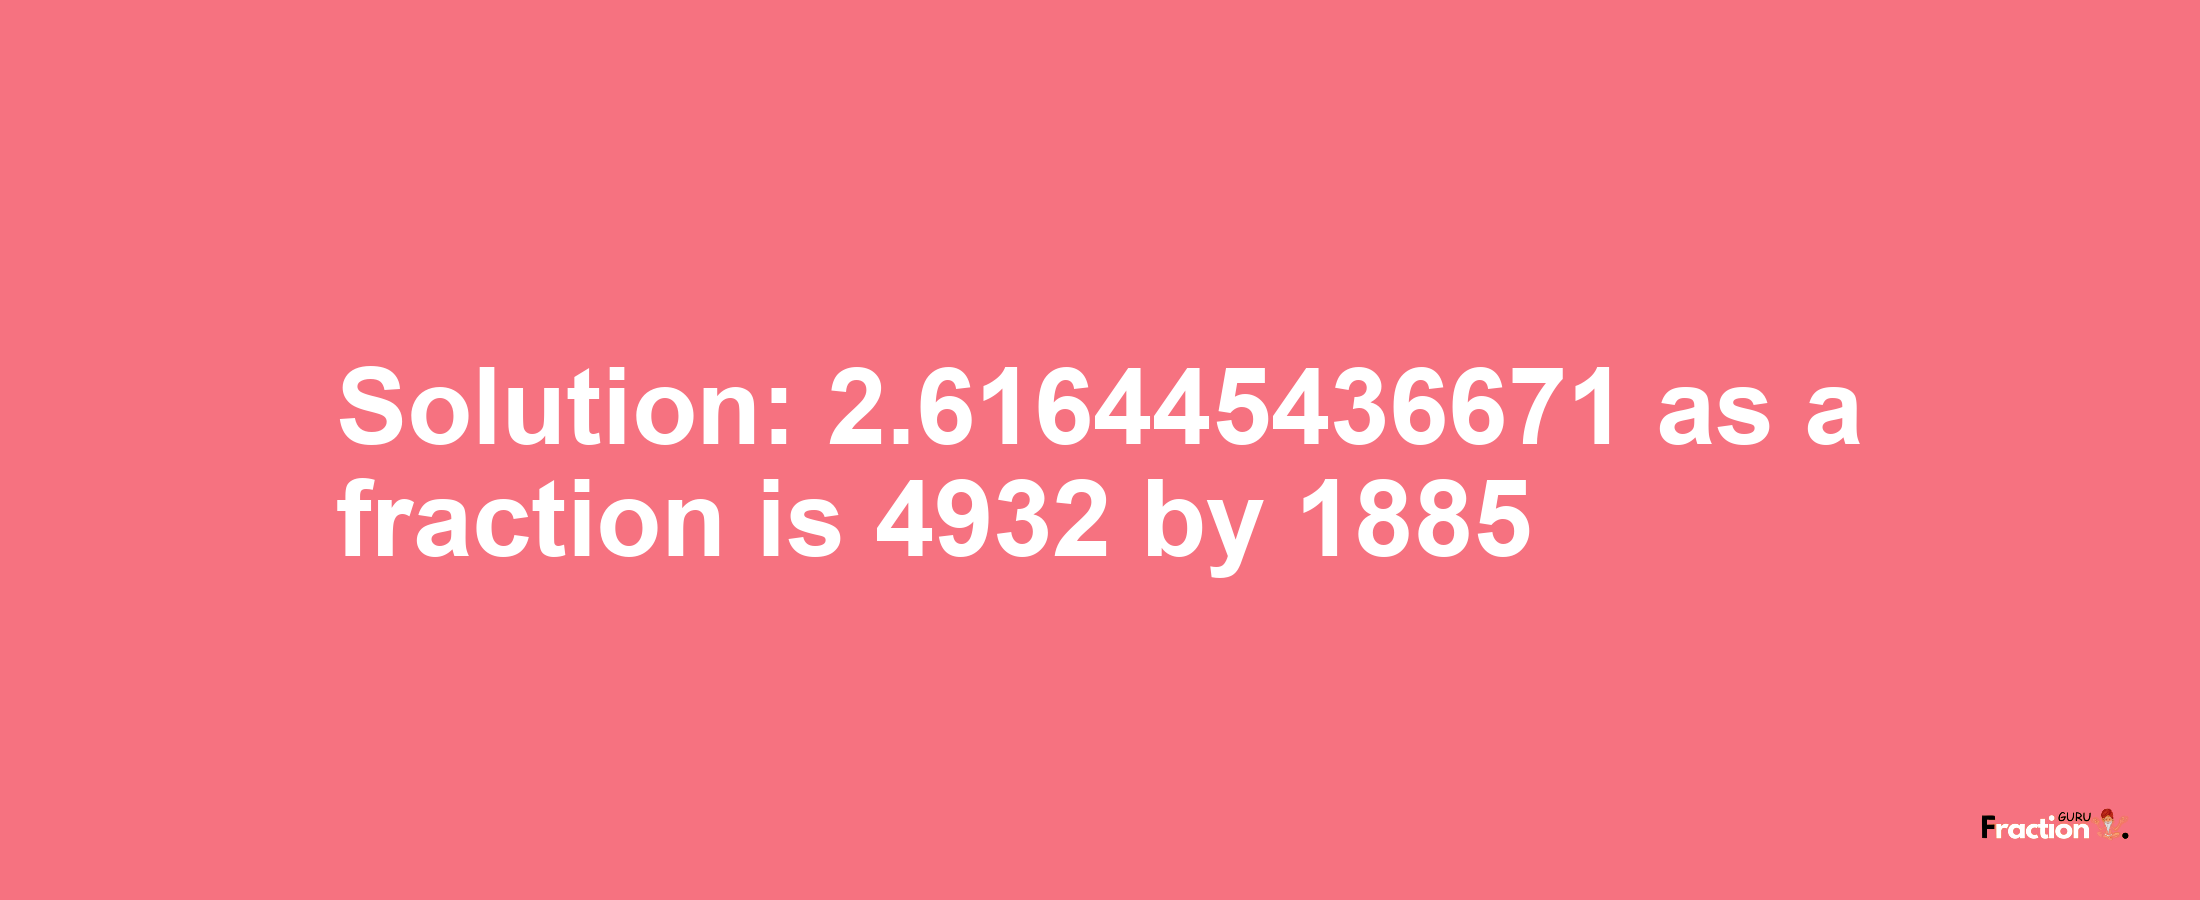 Solution:2.616445436671 as a fraction is 4932/1885